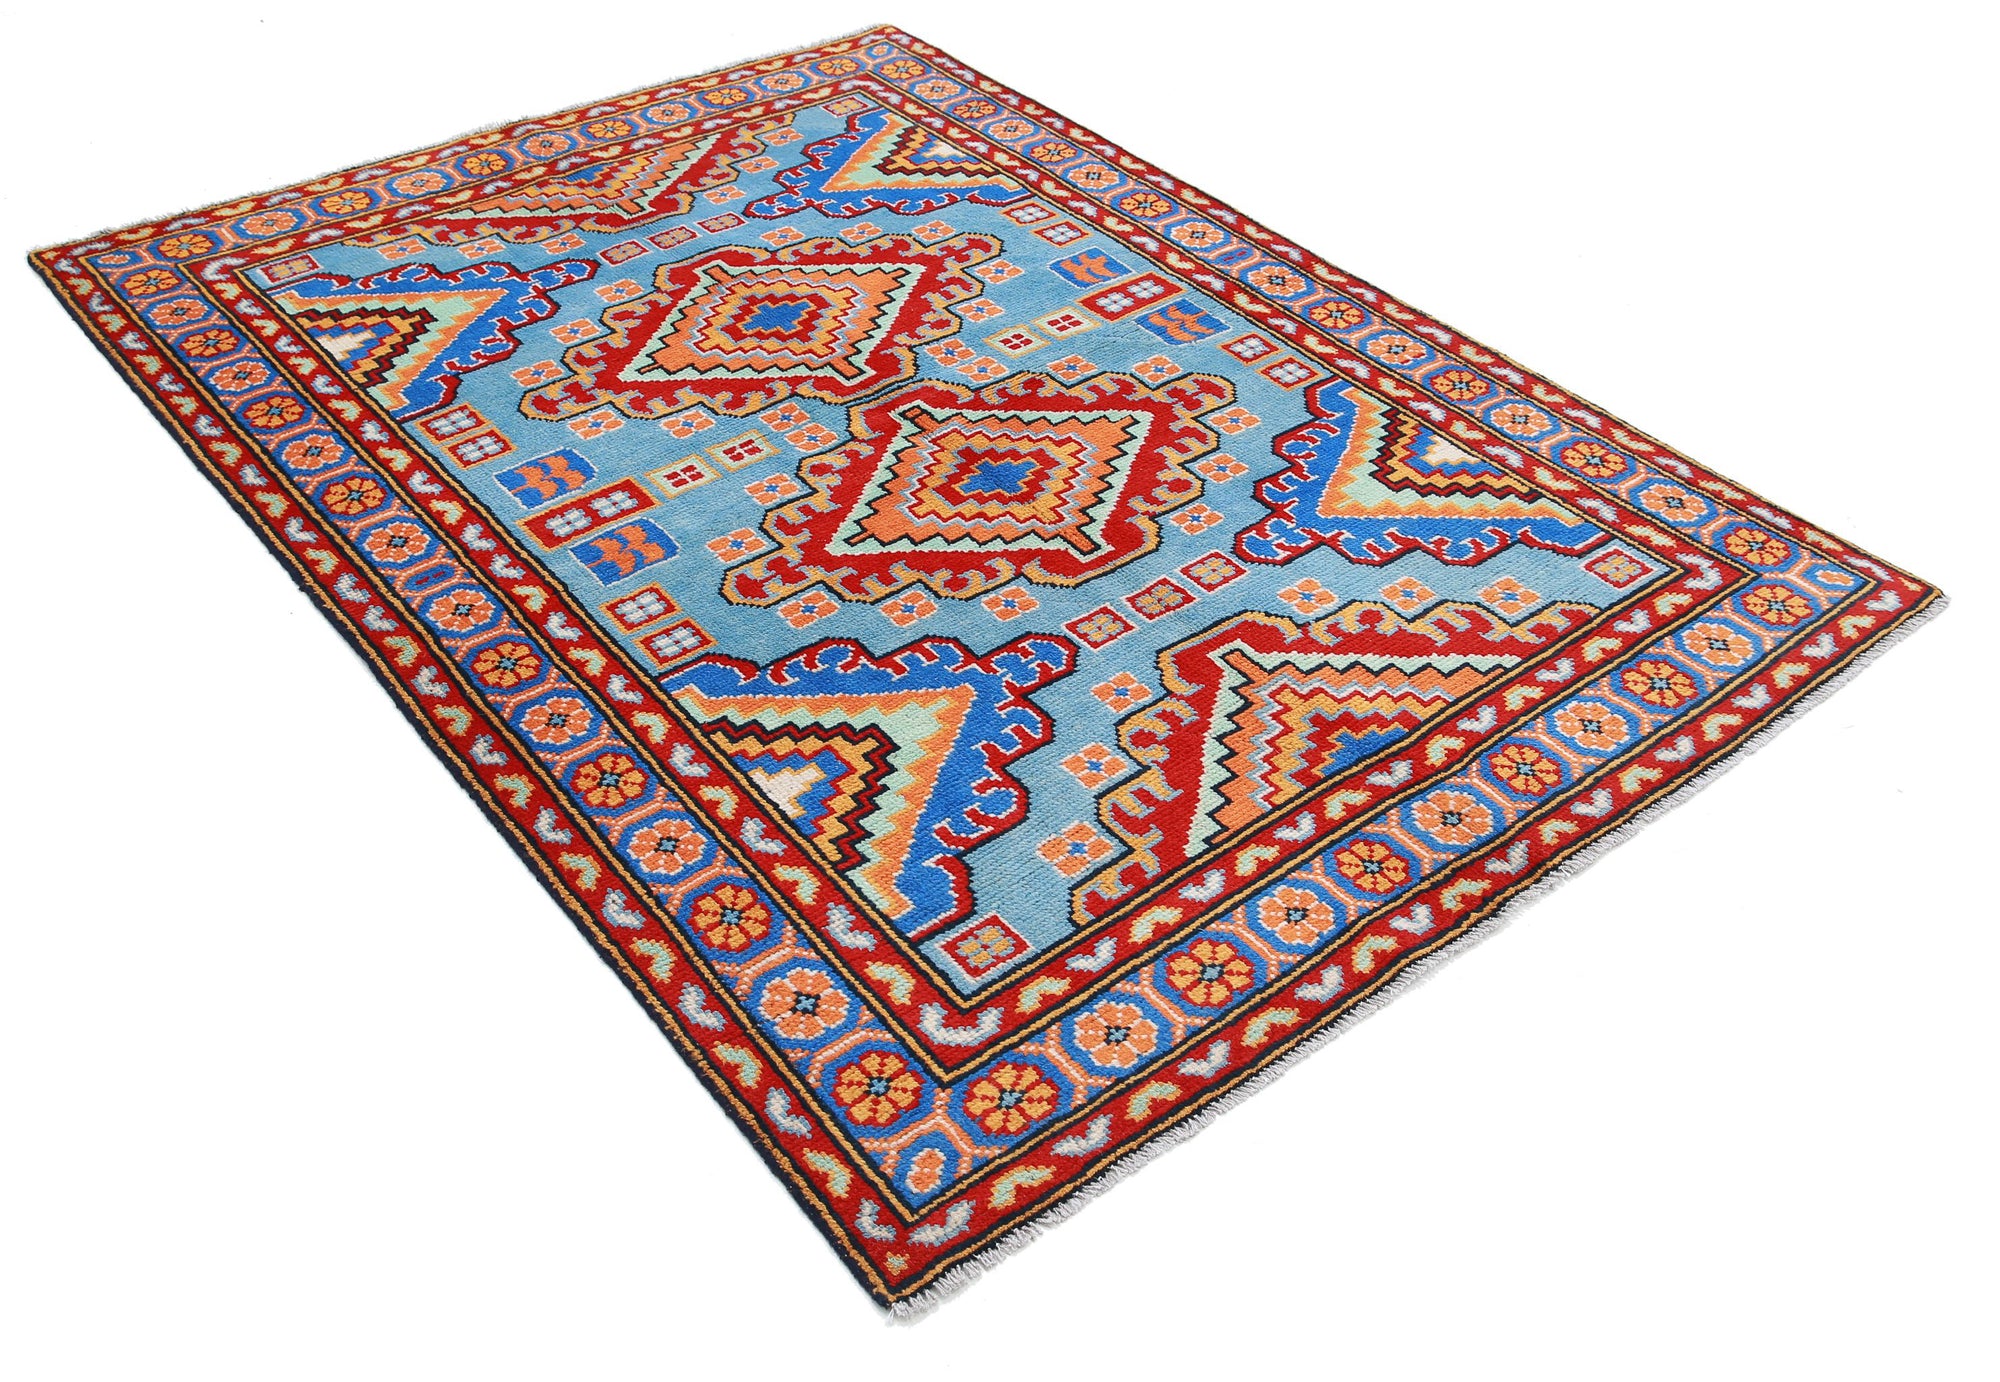 Revival-hand-knotted-qarghani-wool-rug-5014216-1.jpg